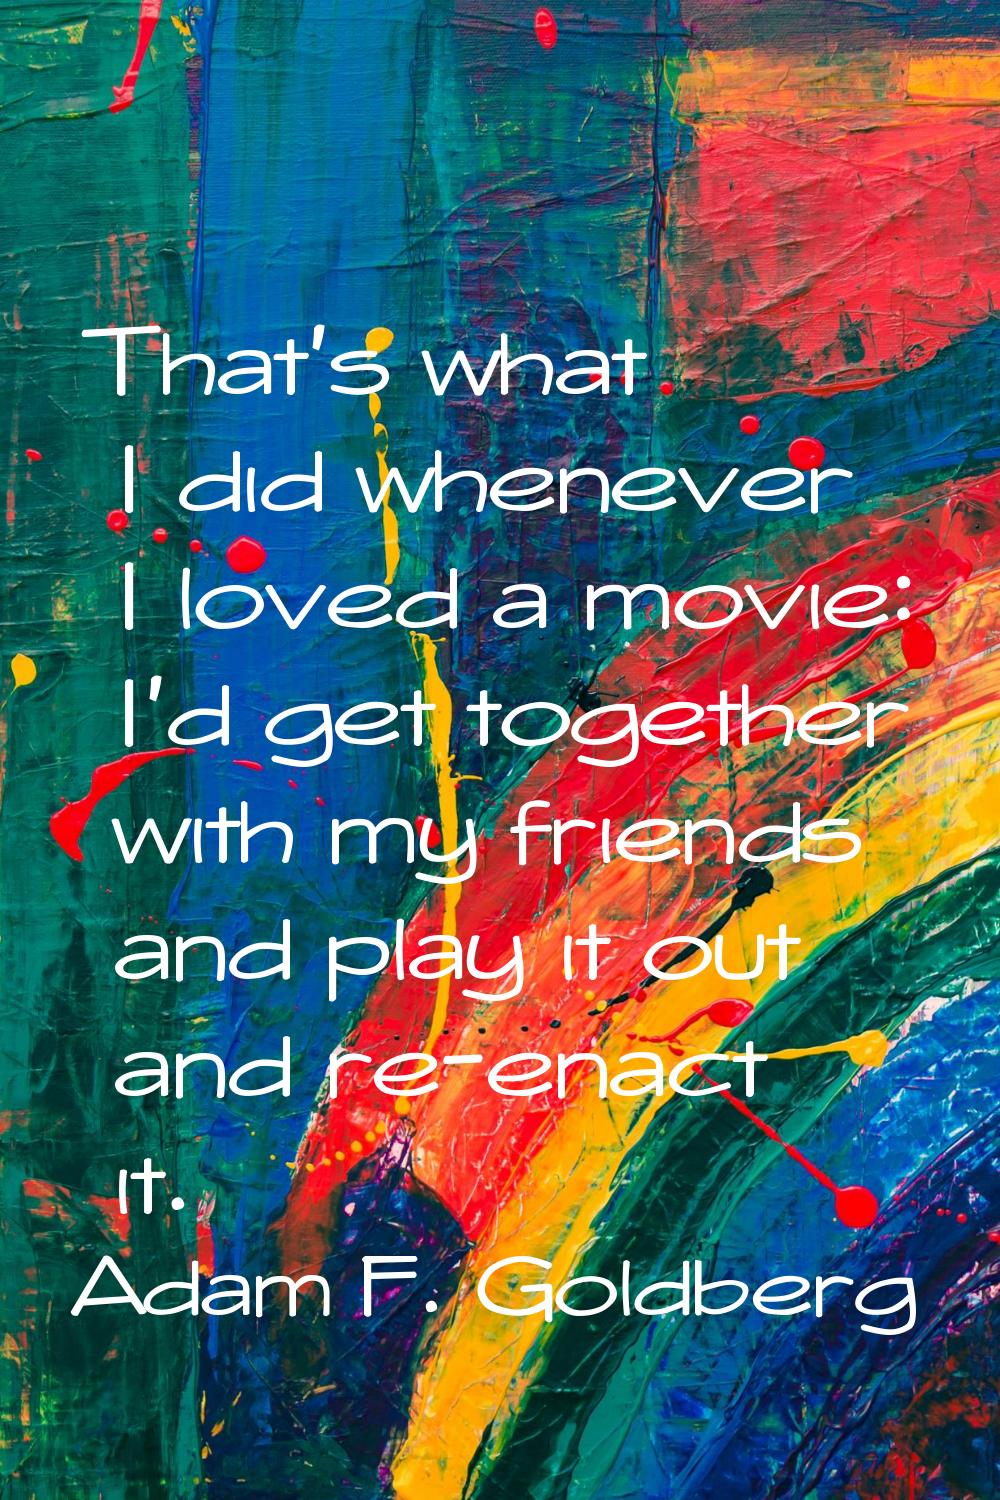 That's what I did whenever I loved a movie: I'd get together with my friends and play it out and re